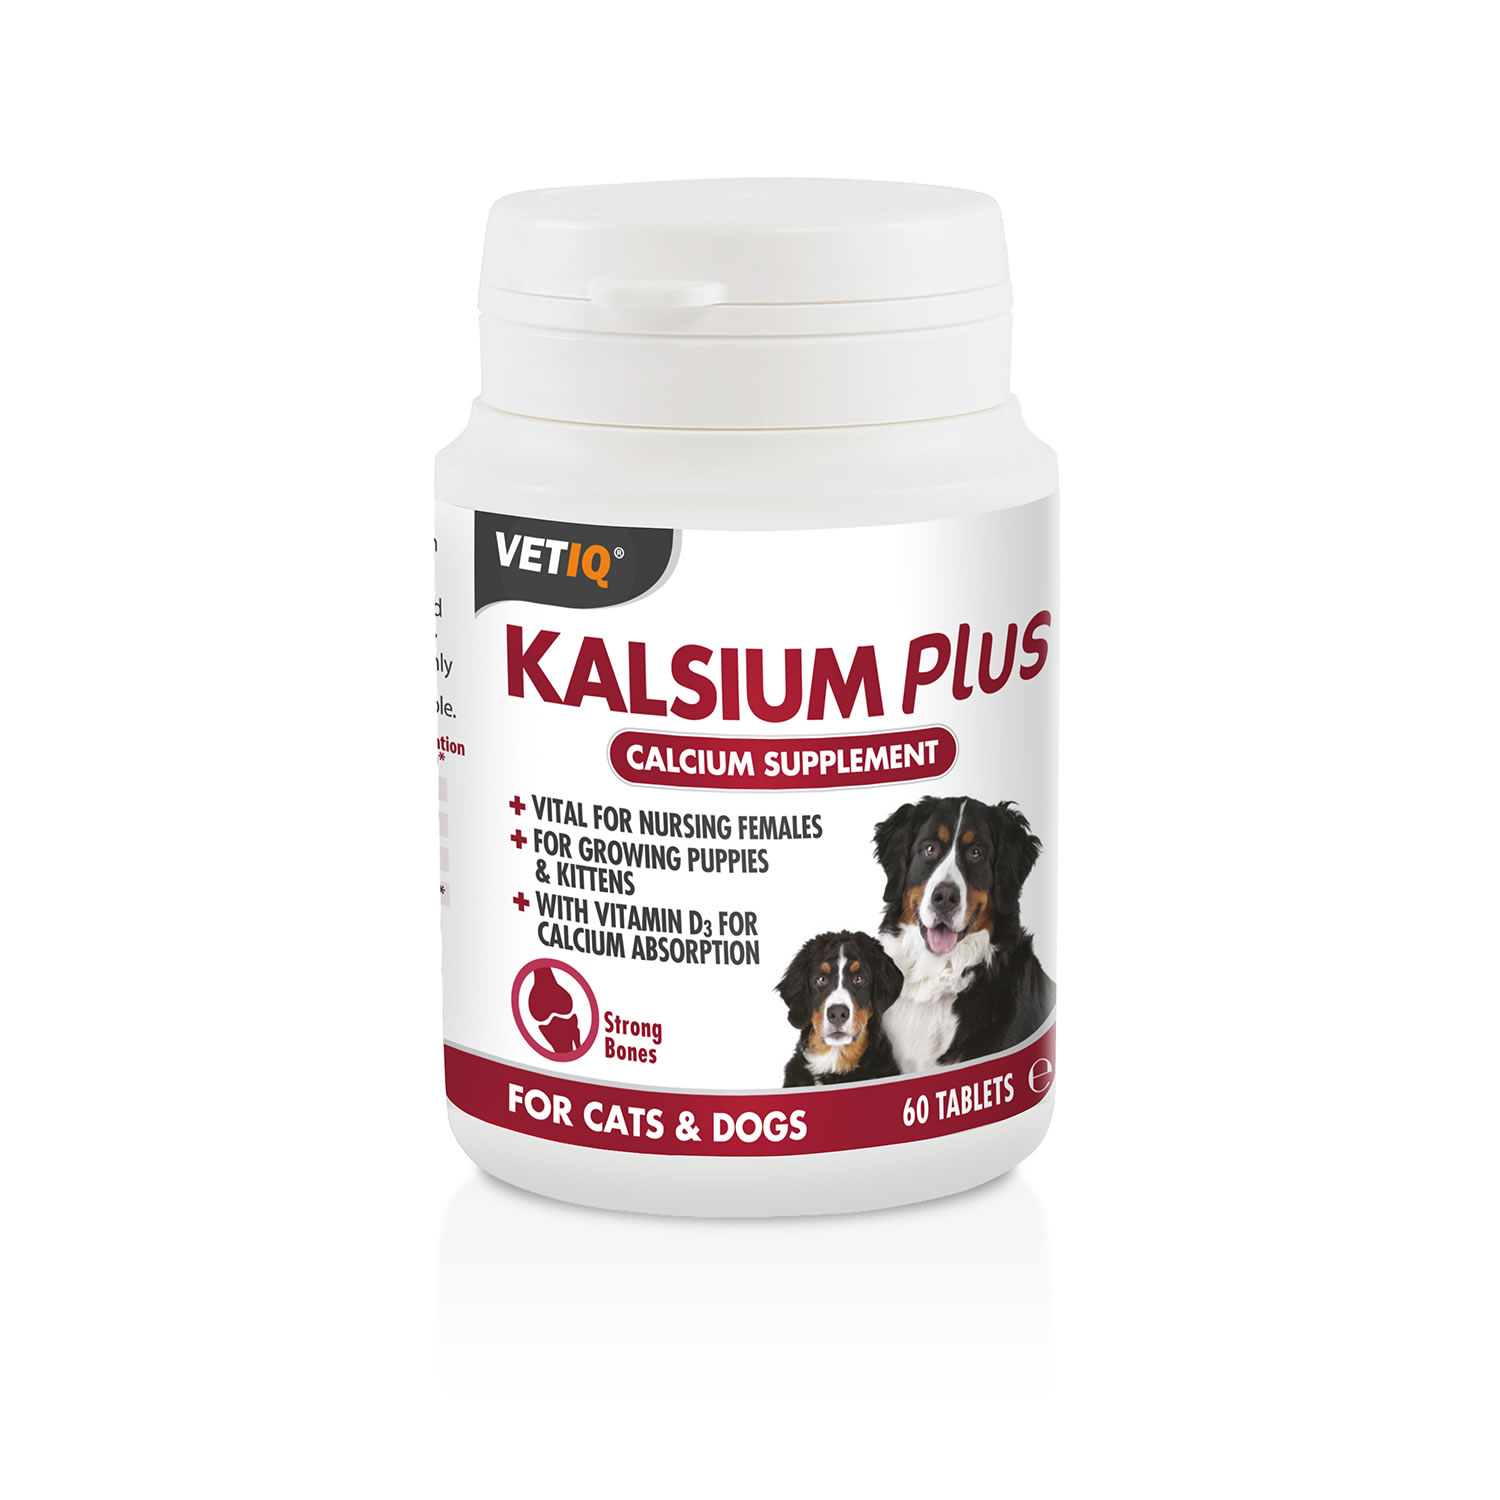 VETIQ KALSIUM PLUS TABLETS FOR CATS & DOGS  60 PACK